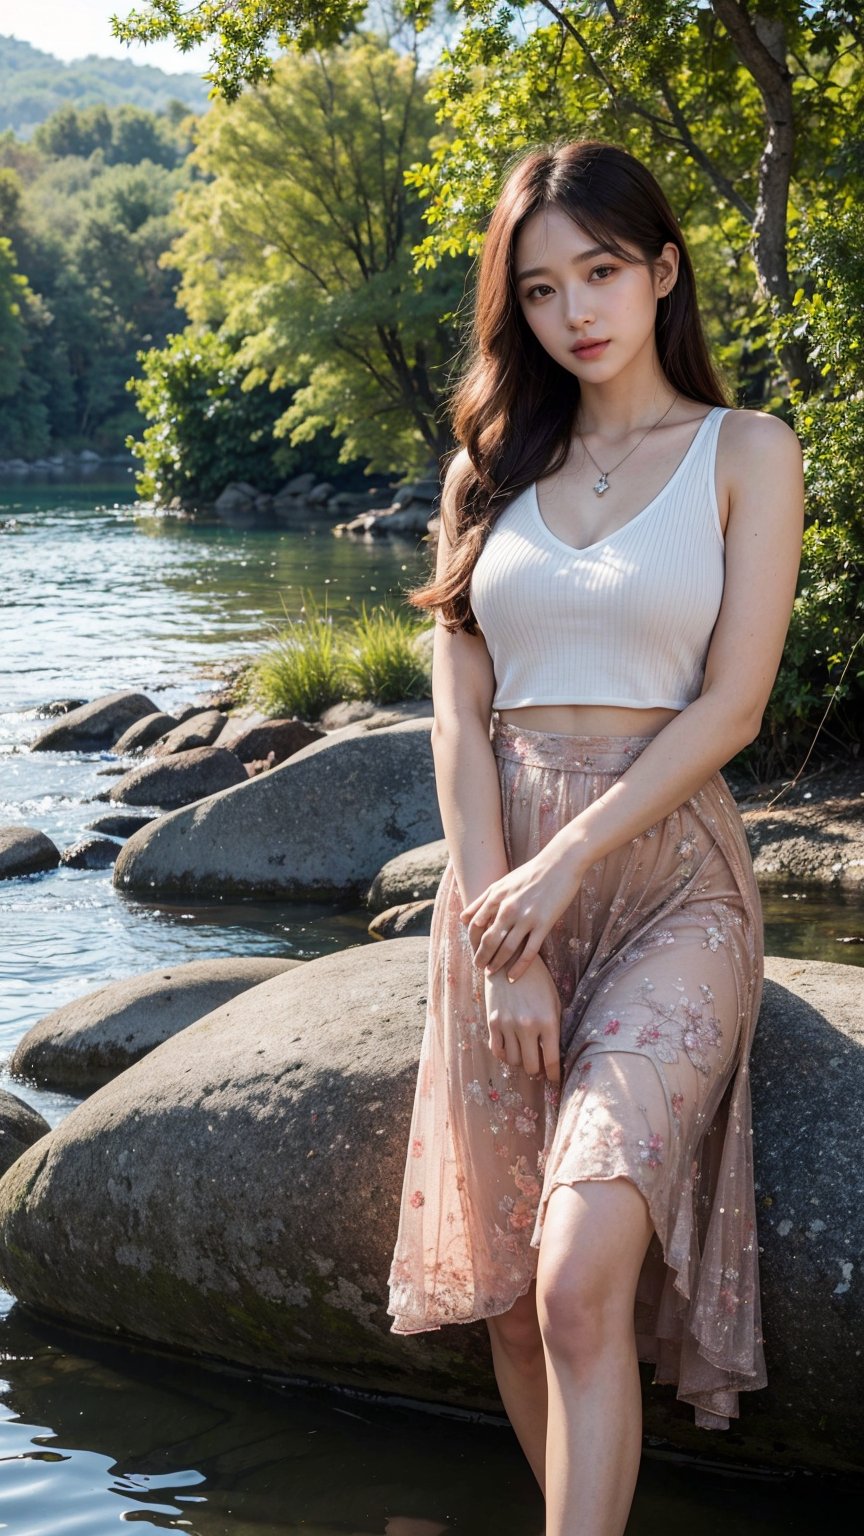 1 girl, happy expression, charming eyes, straight long hair, flowing skirt, big, looking at the sun, calm posture, porcelain-like skin, subtle blush, crystal pendant BREAK Golden Hour, (edge lighting): 1.2, cool colors, sun flare, soft shadows, bright colors, painting effects, fantastic atmosphere BREAK Scenic lakes, distant mountains, pine trees, mountain tops, reflections, sunlit clouds, tranquil atmosphere, idyllic sunrise, Ultra detailed, official art, unified 8k wallpapers, zentangle, mandala